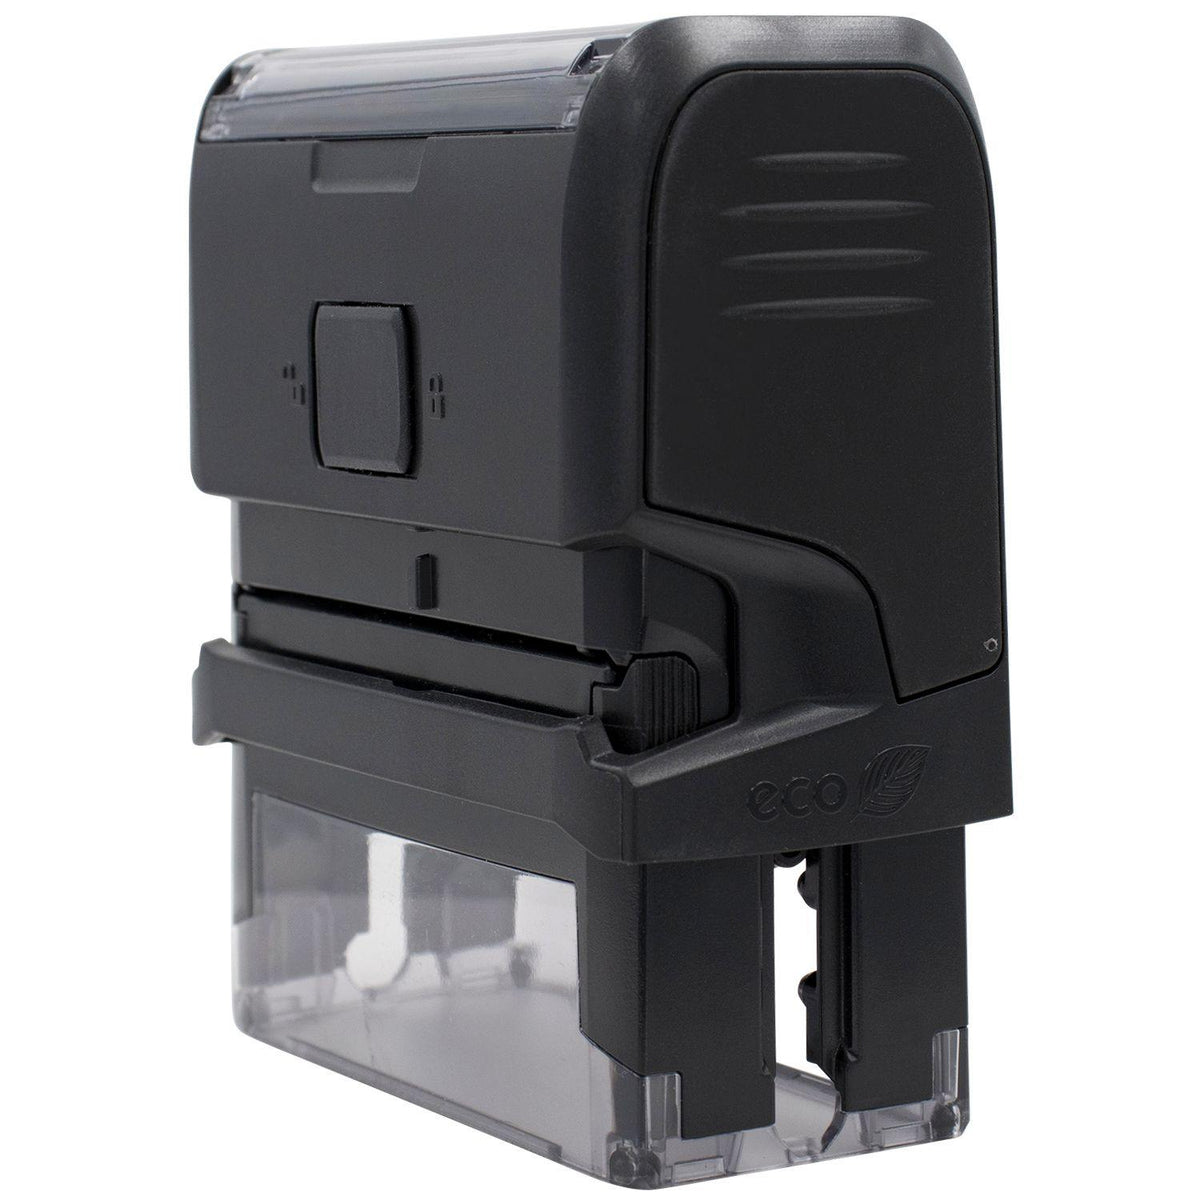 Self Inking Important Stamp - Engineer Seal Stamps - Brand_Trodat, Impression Size_Small, Stamp Type_Self-Inking Stamp, Type of Use_Office